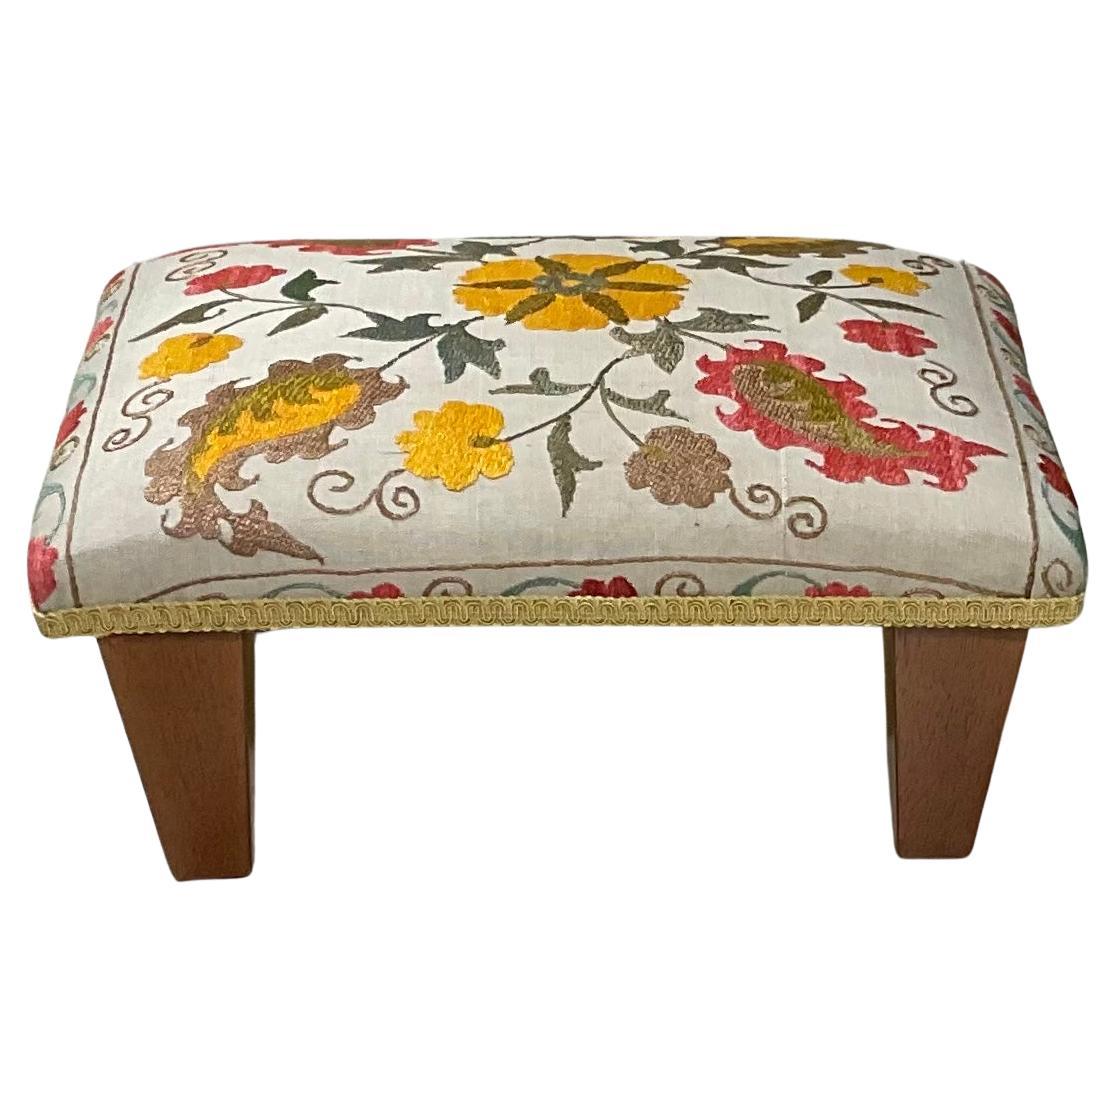 Funky Hand Embroidery Suzani Upholstered Foot Stool For Sale